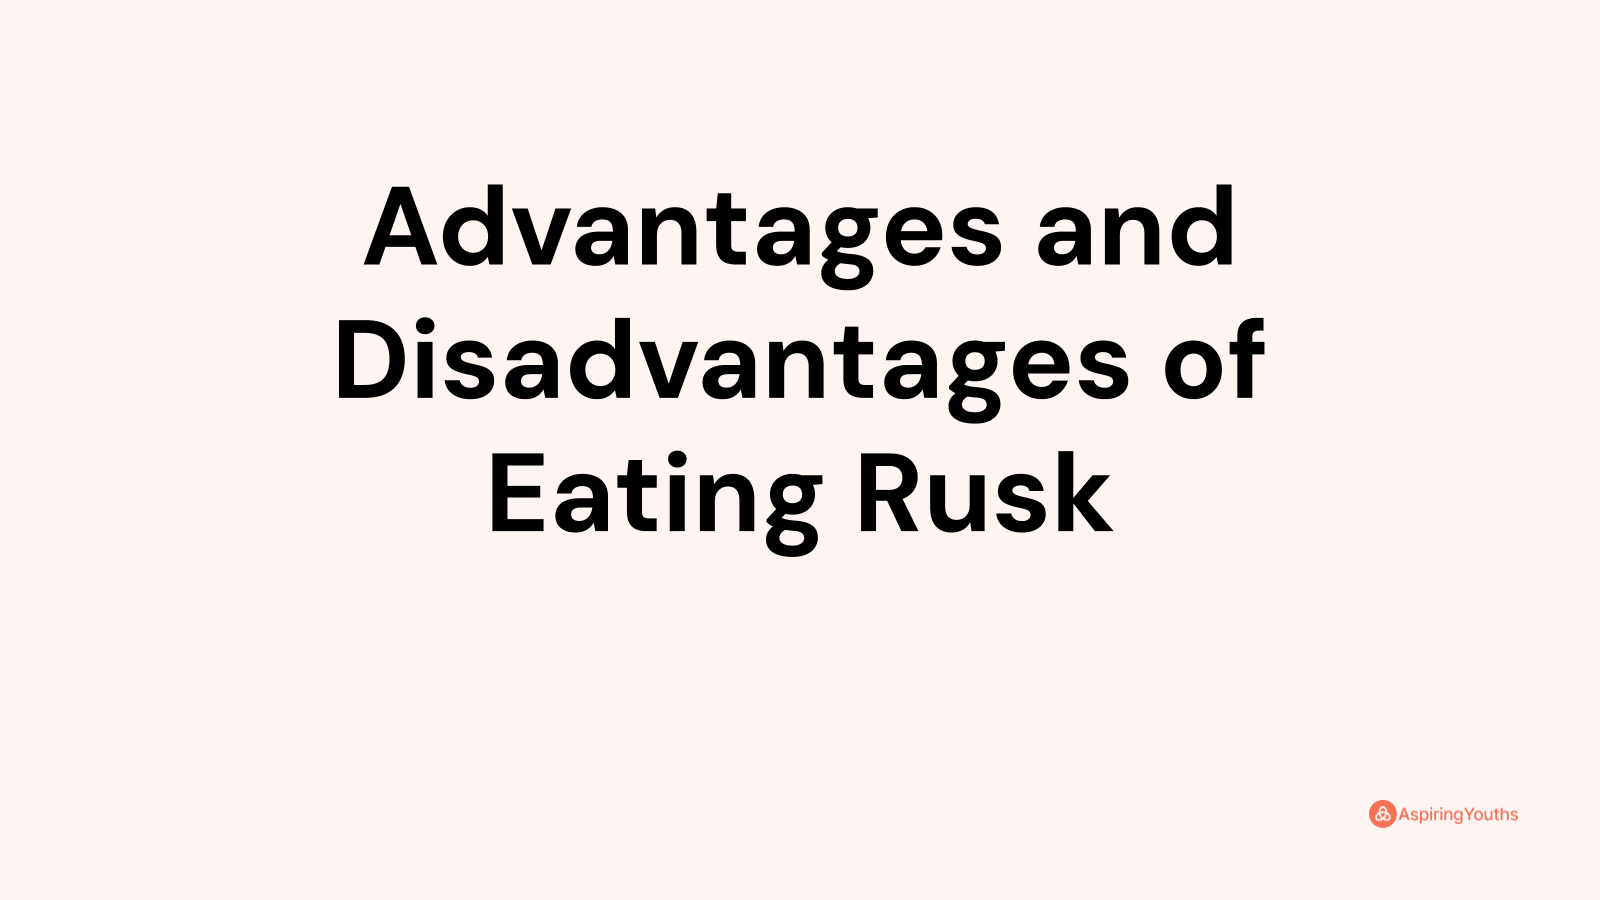 Advantages and disadvantages of Eating Rusk